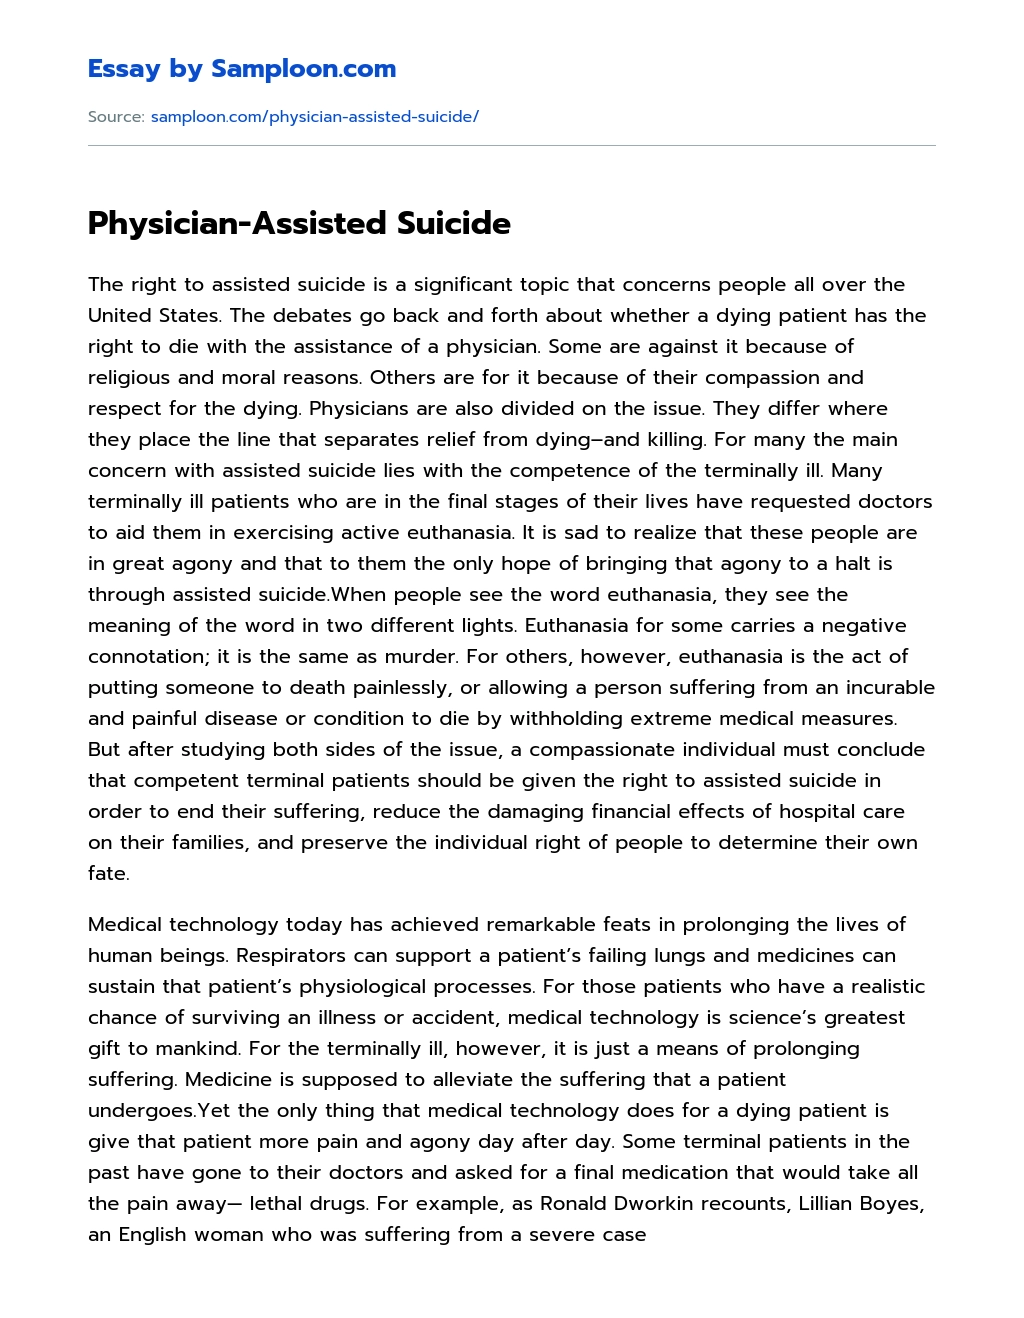 Physician-Assisted Suicide essay